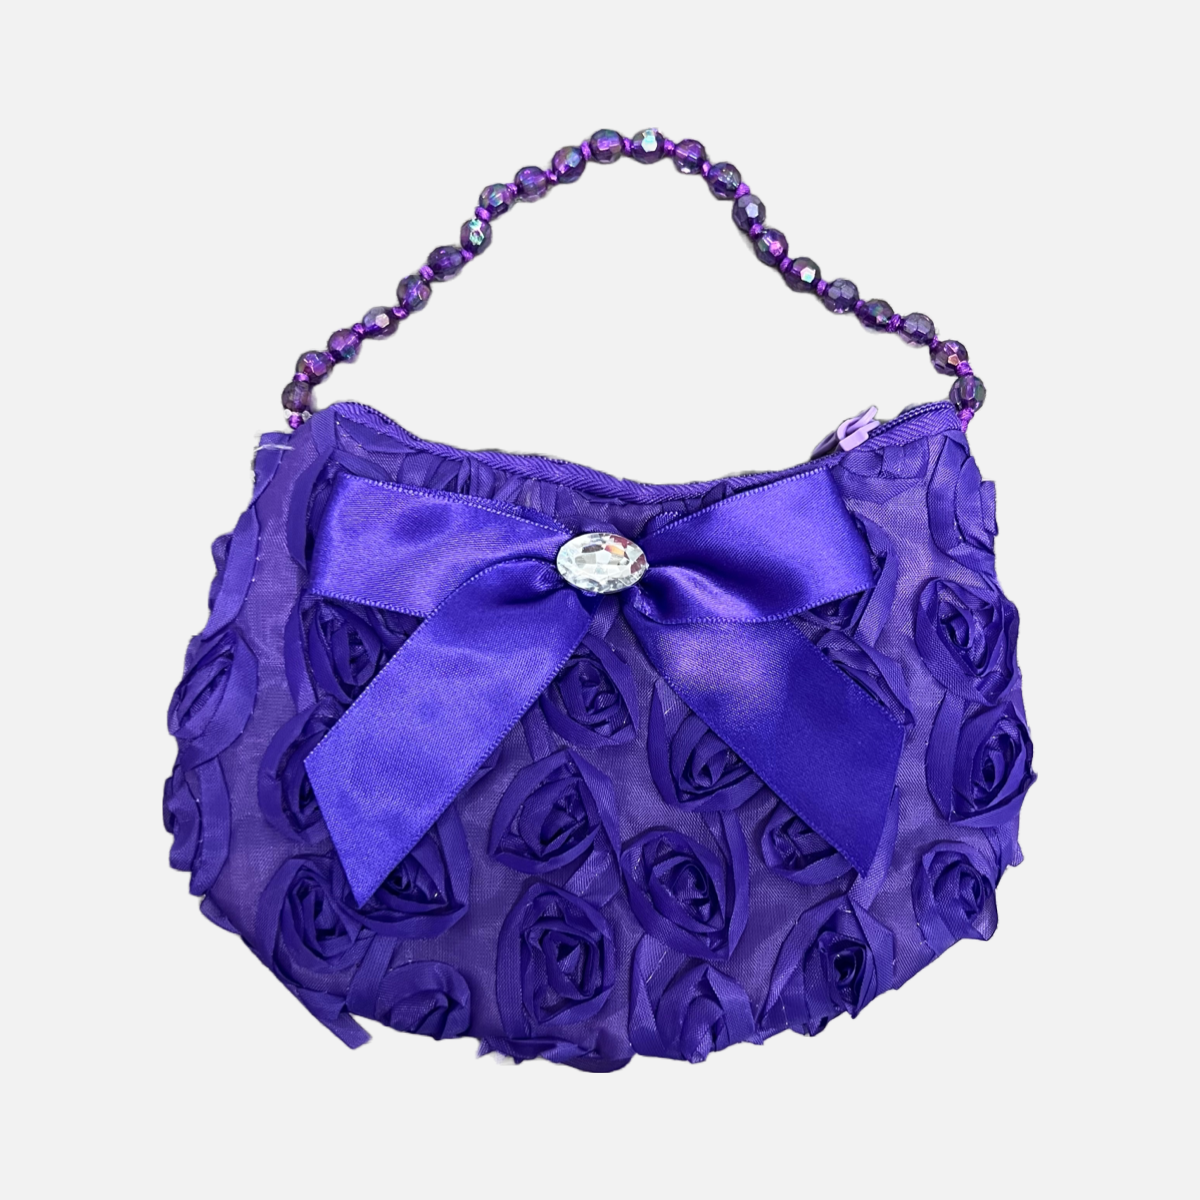 Rosette Purse with Bow